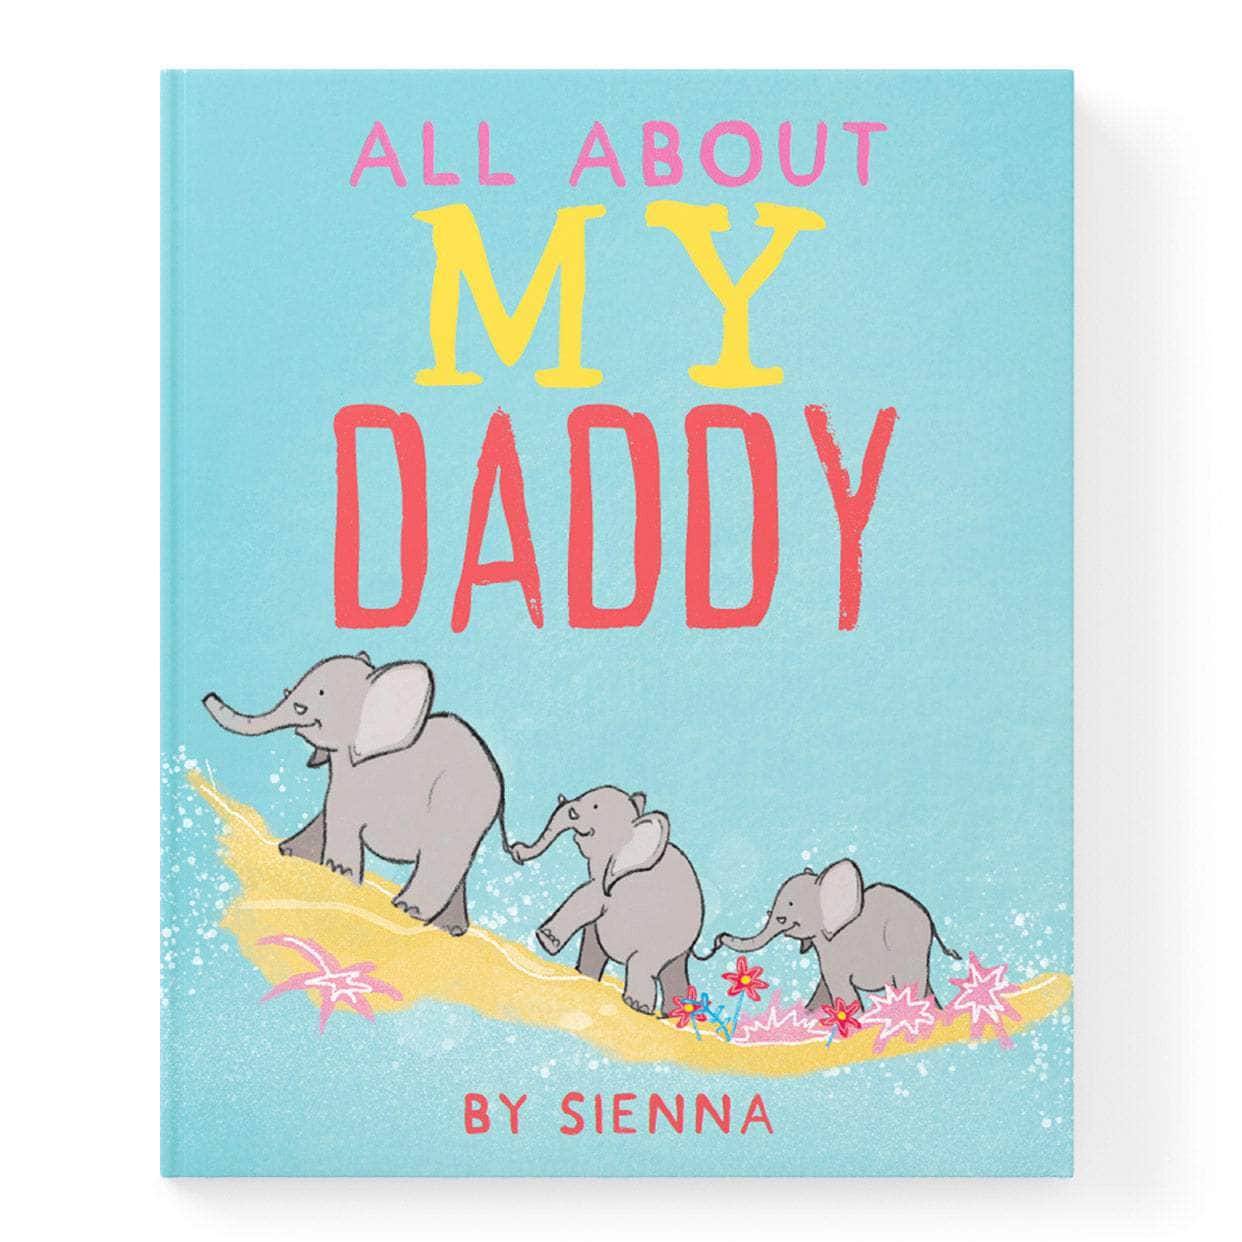 All About Dad Personalised Book Letterfest Reviews On Judgeme 4044